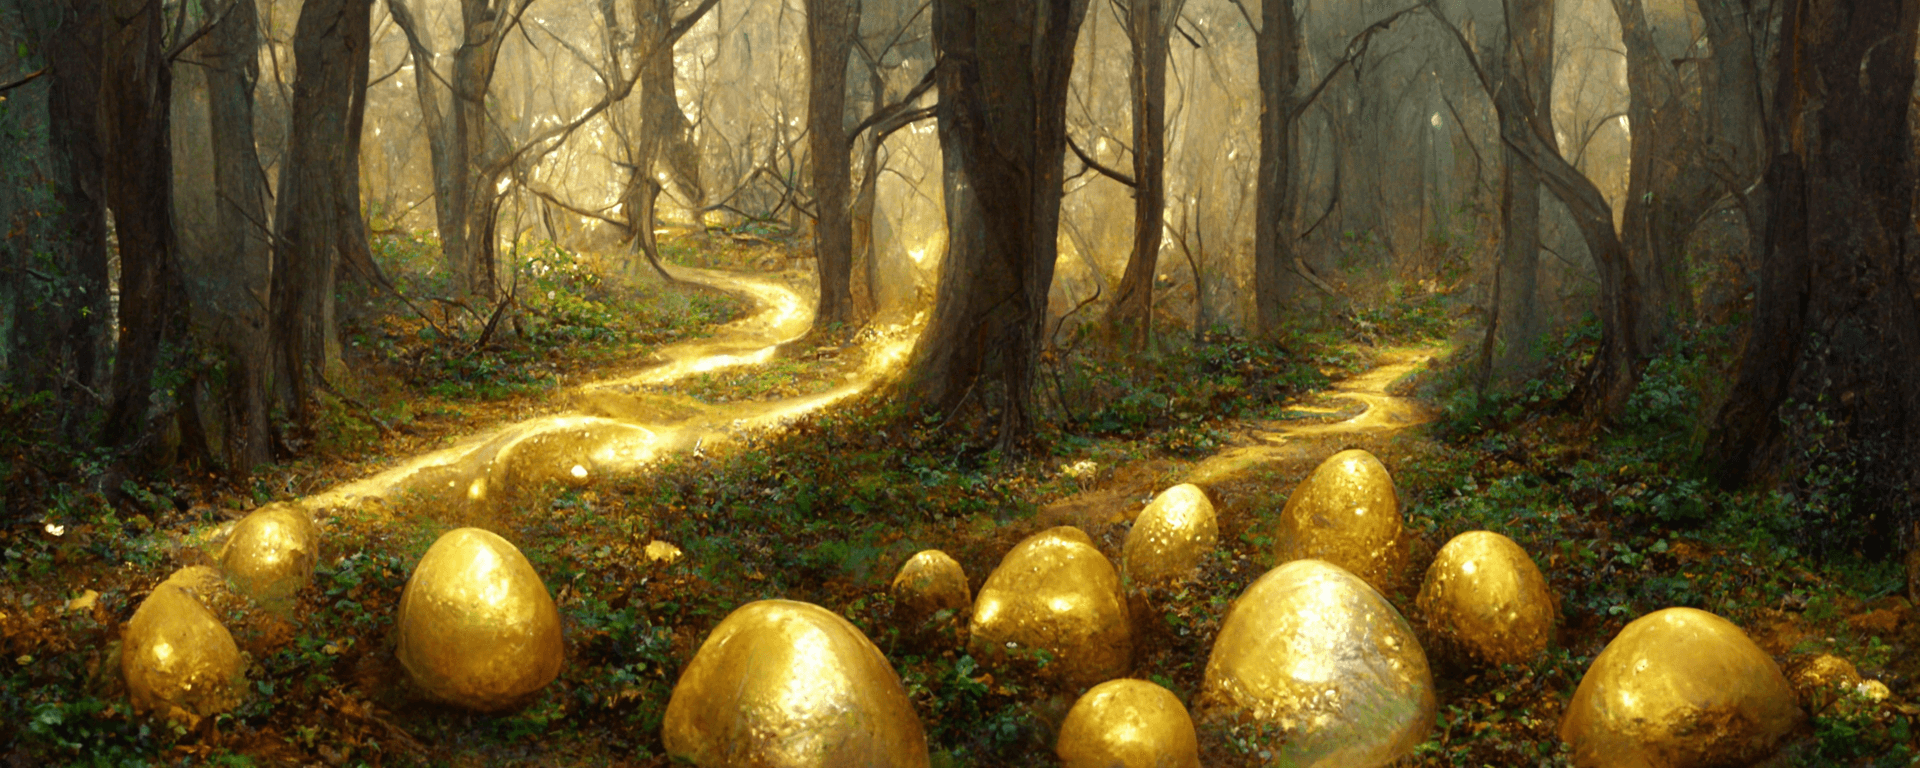 Golden eggs at the beginning of a path through a forest